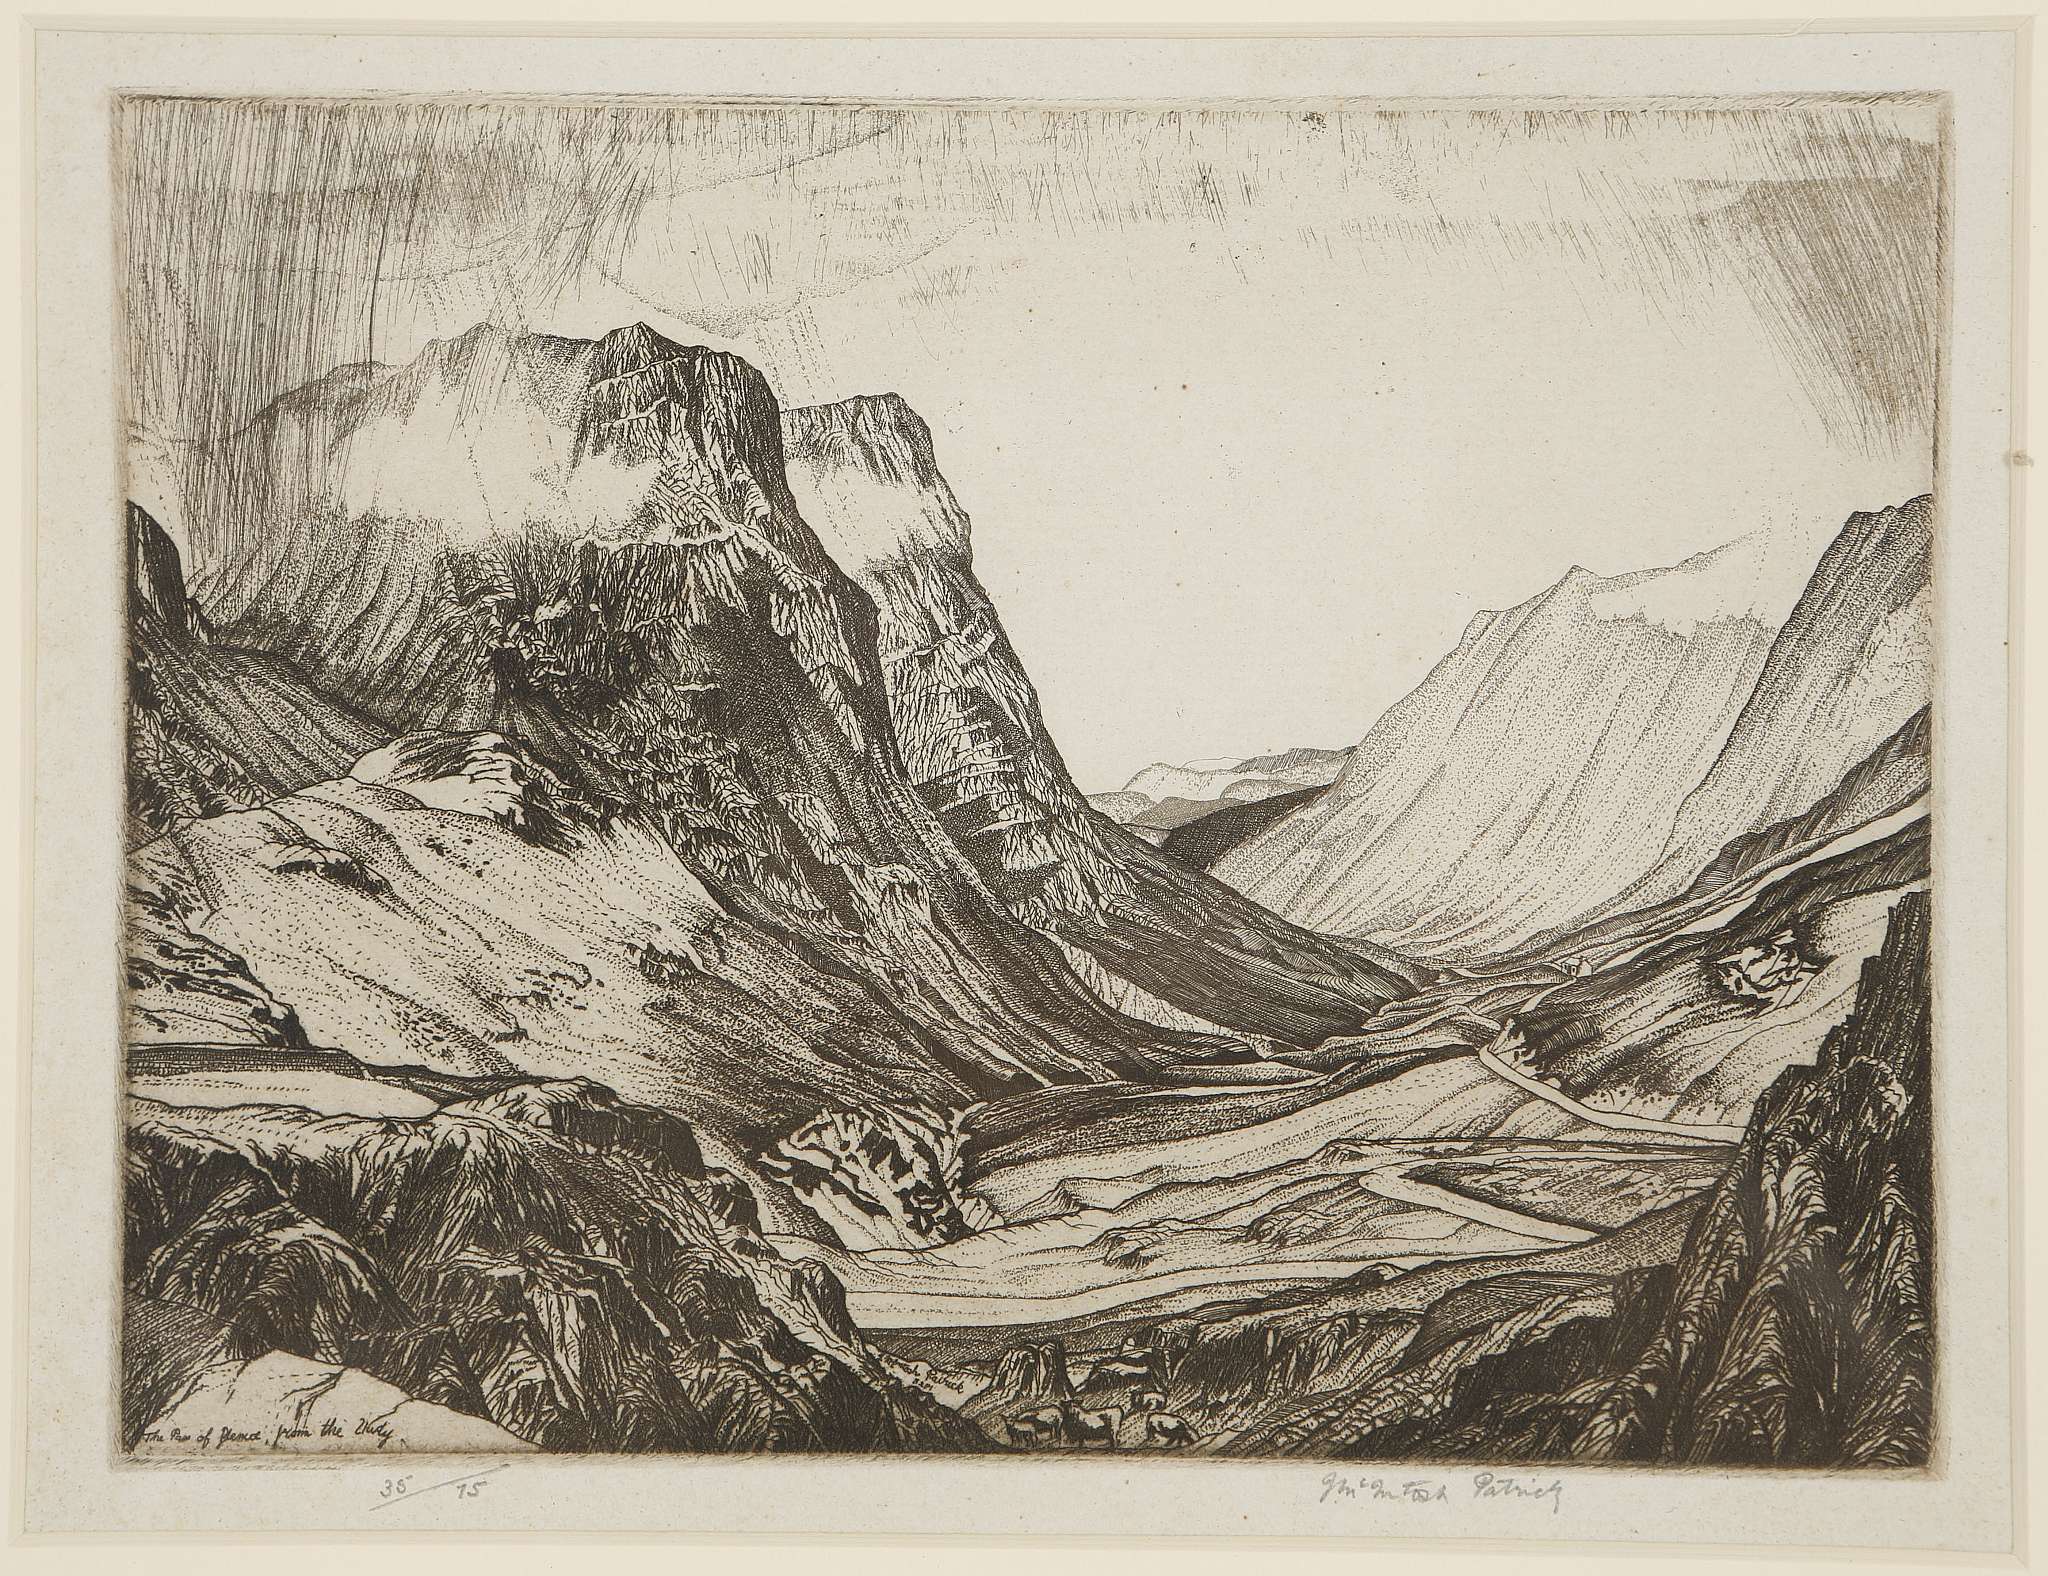 James McIntosh Patrick R.S.A. 1907-1988, 'The Pass of Glencoe' 1928, etching, signed in pencil lower - Image 2 of 8